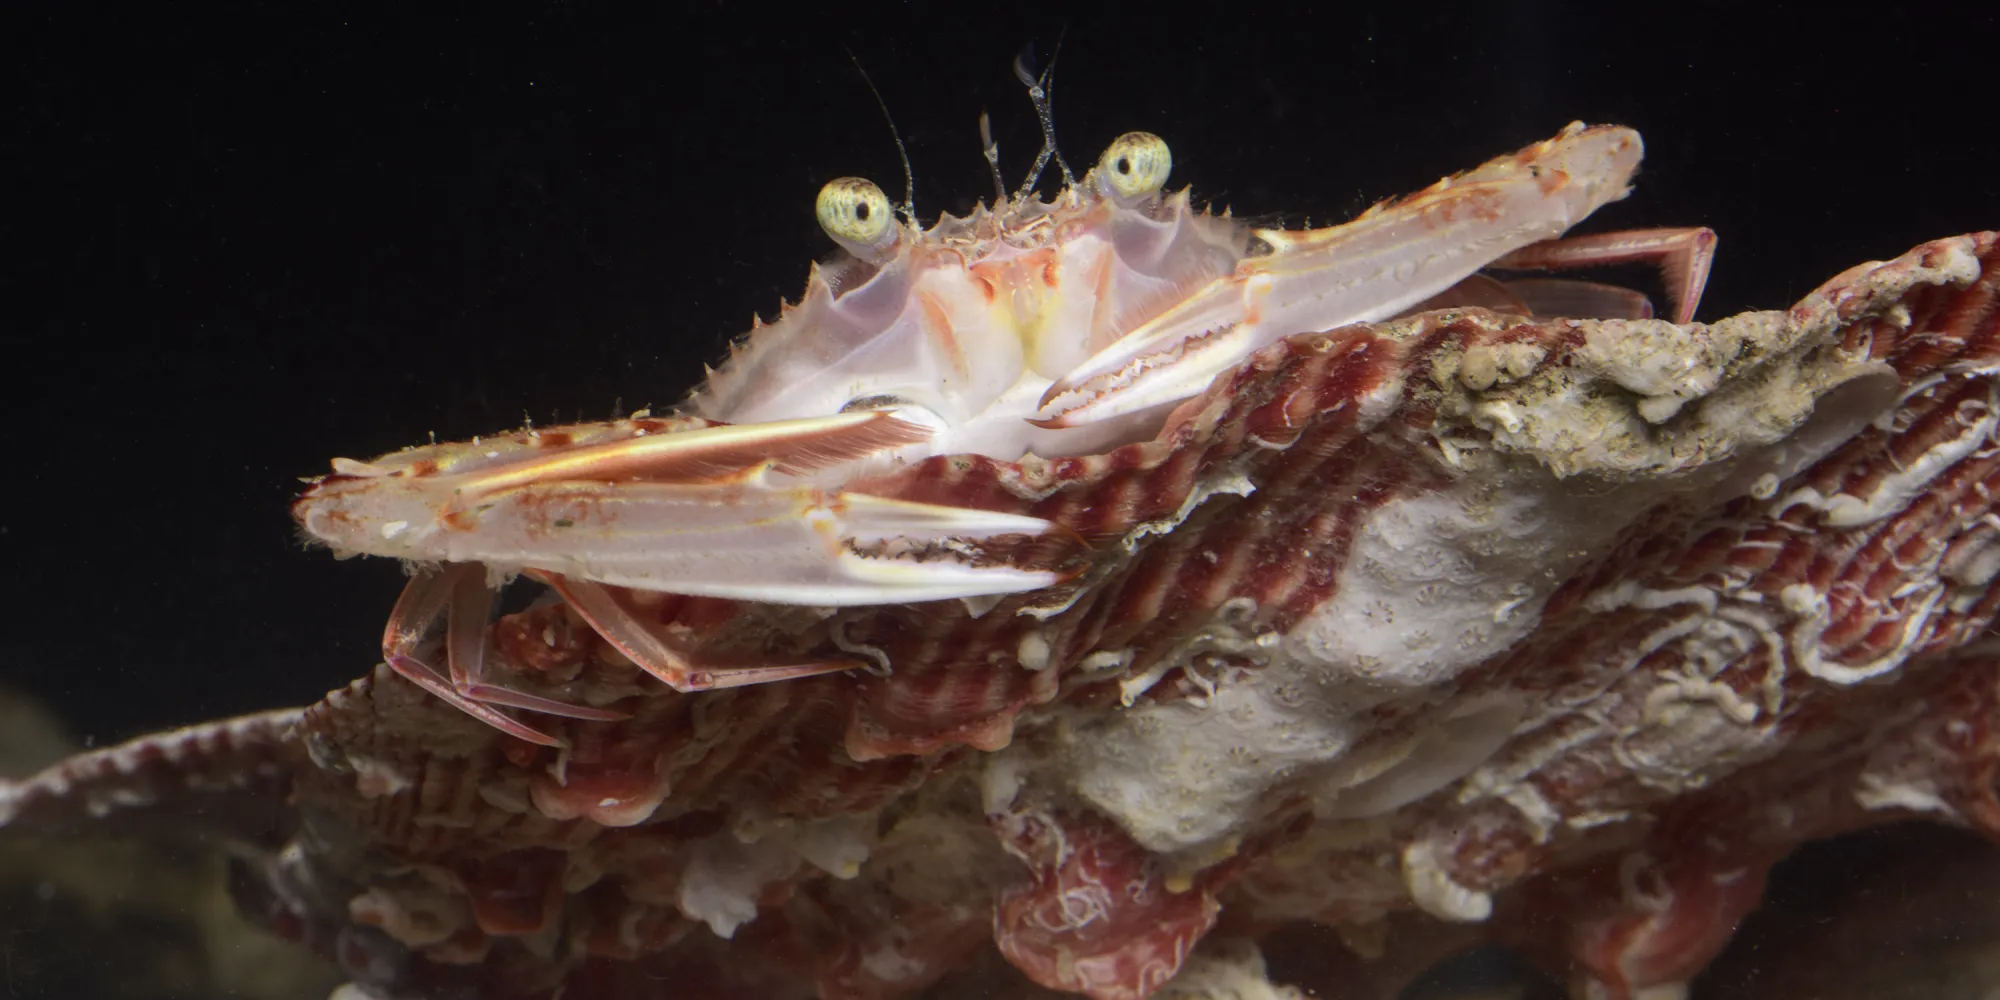 Swimming crab perched on a mollusk shell